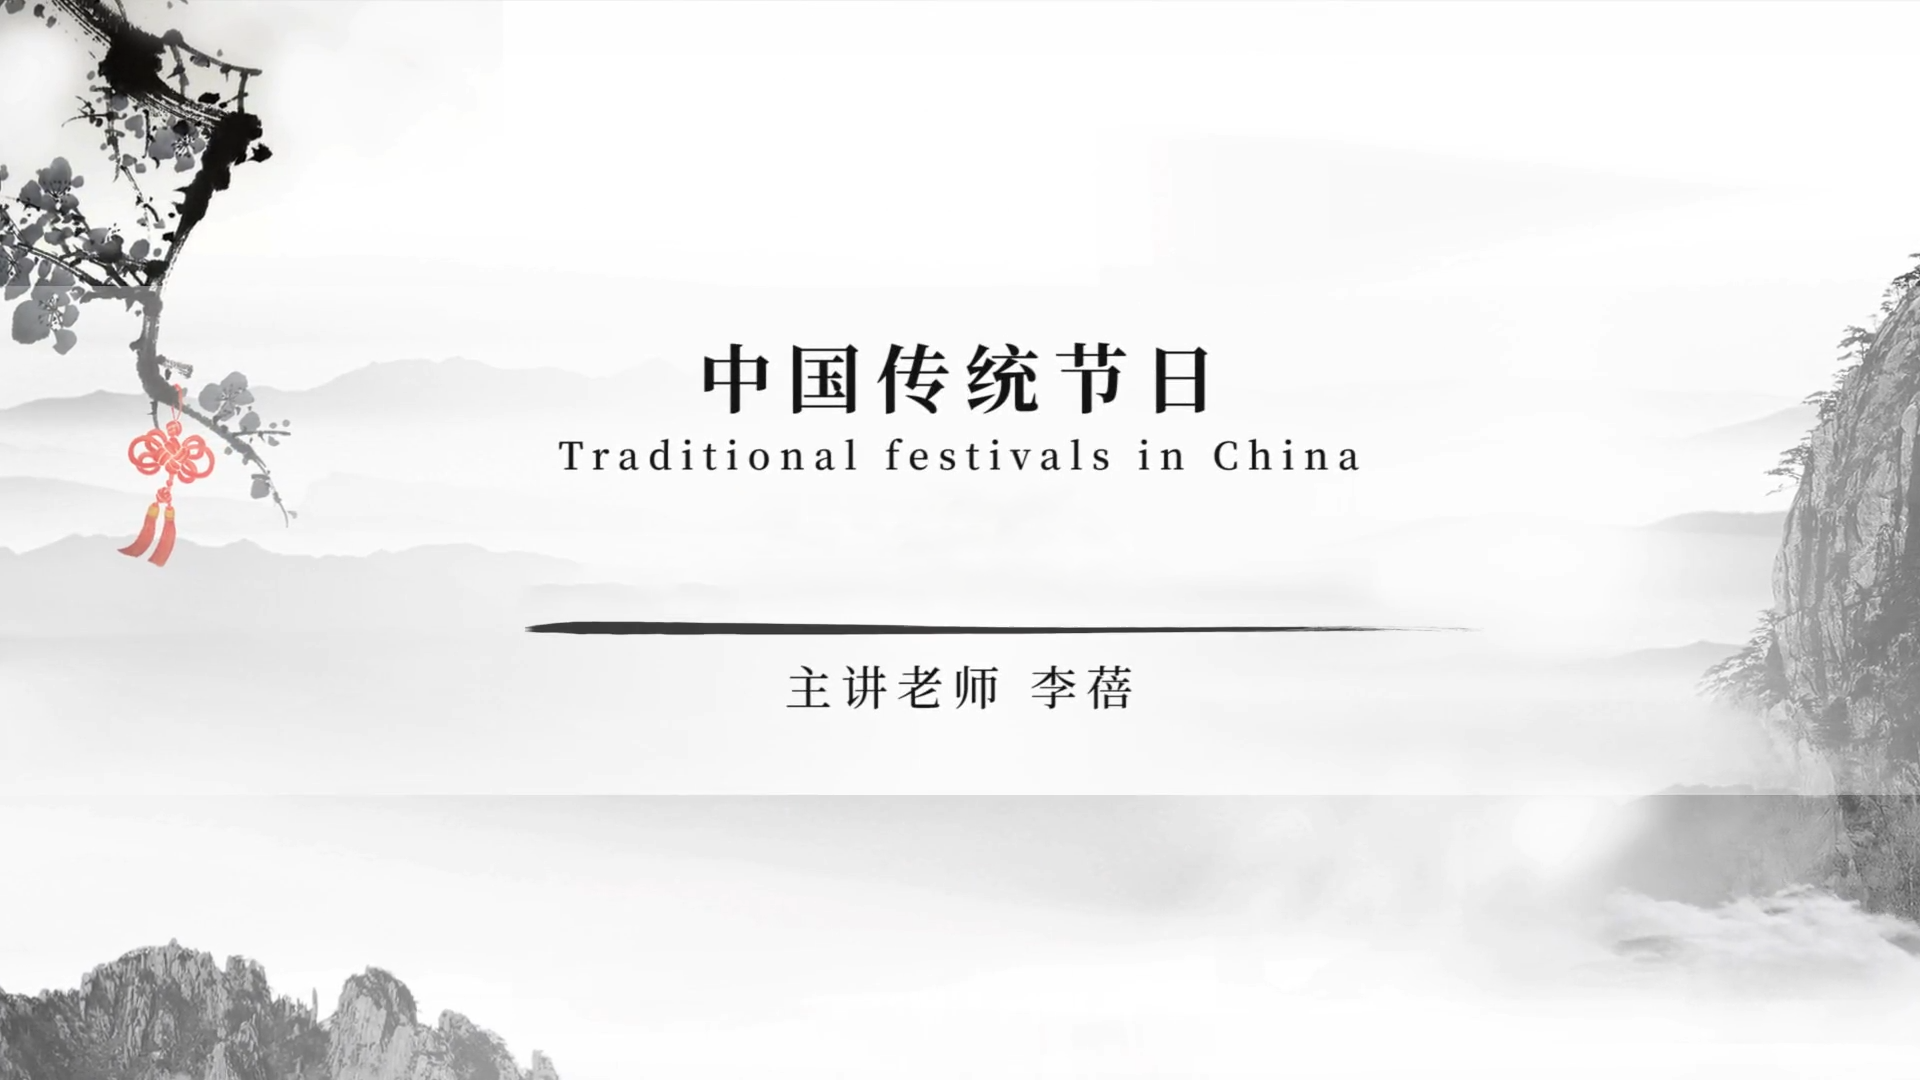 Chinese Culture Course: Traditional Chinese Festivals